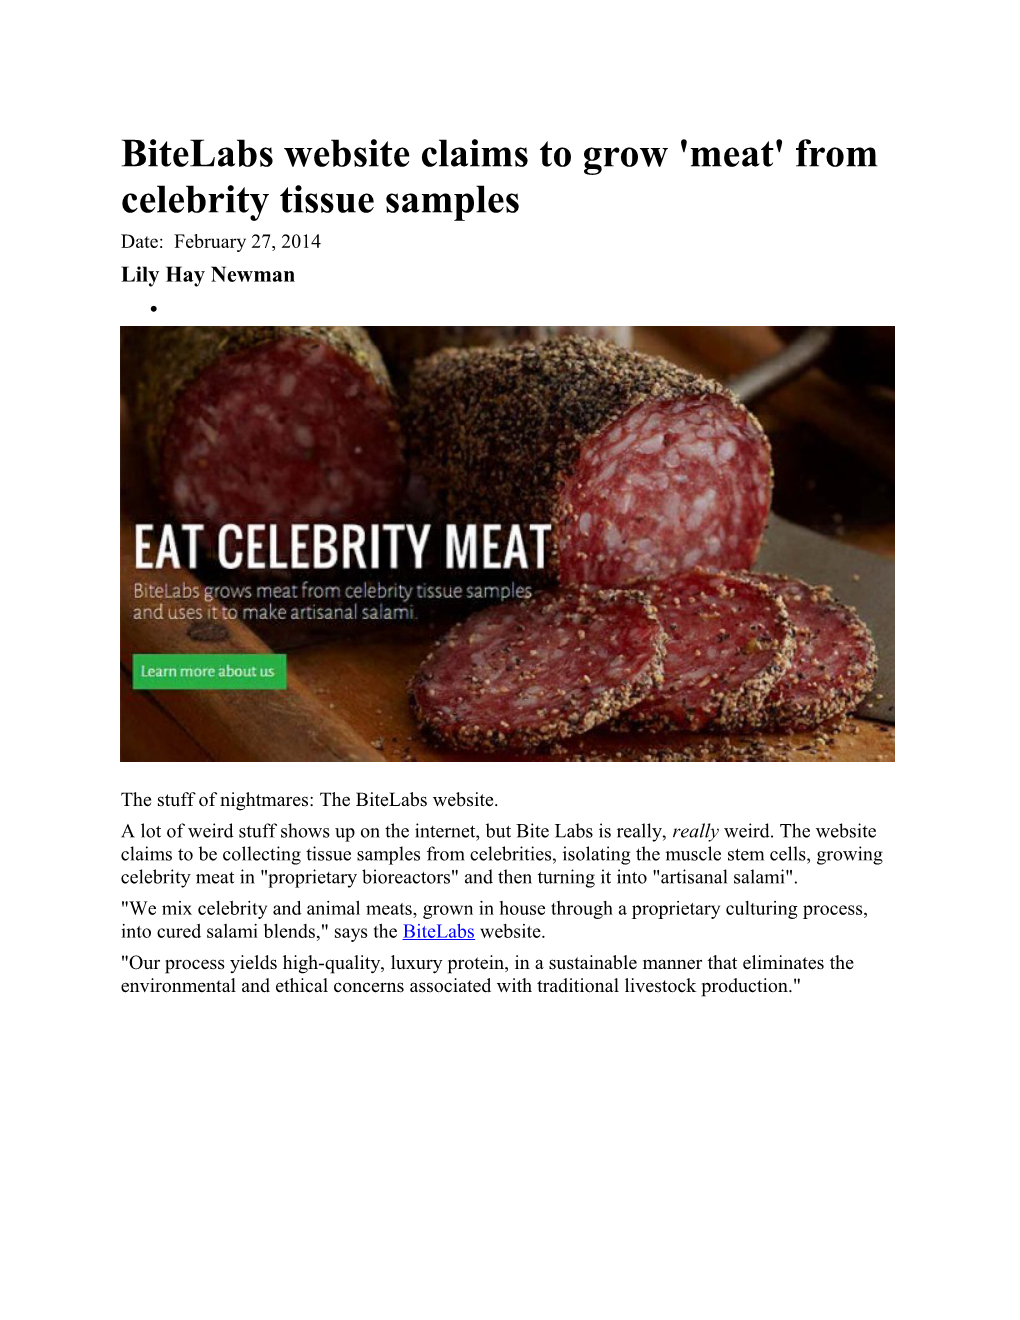 Bitelabs Website Claims to Grow 'Meat' from Celebrity Tissue Samples